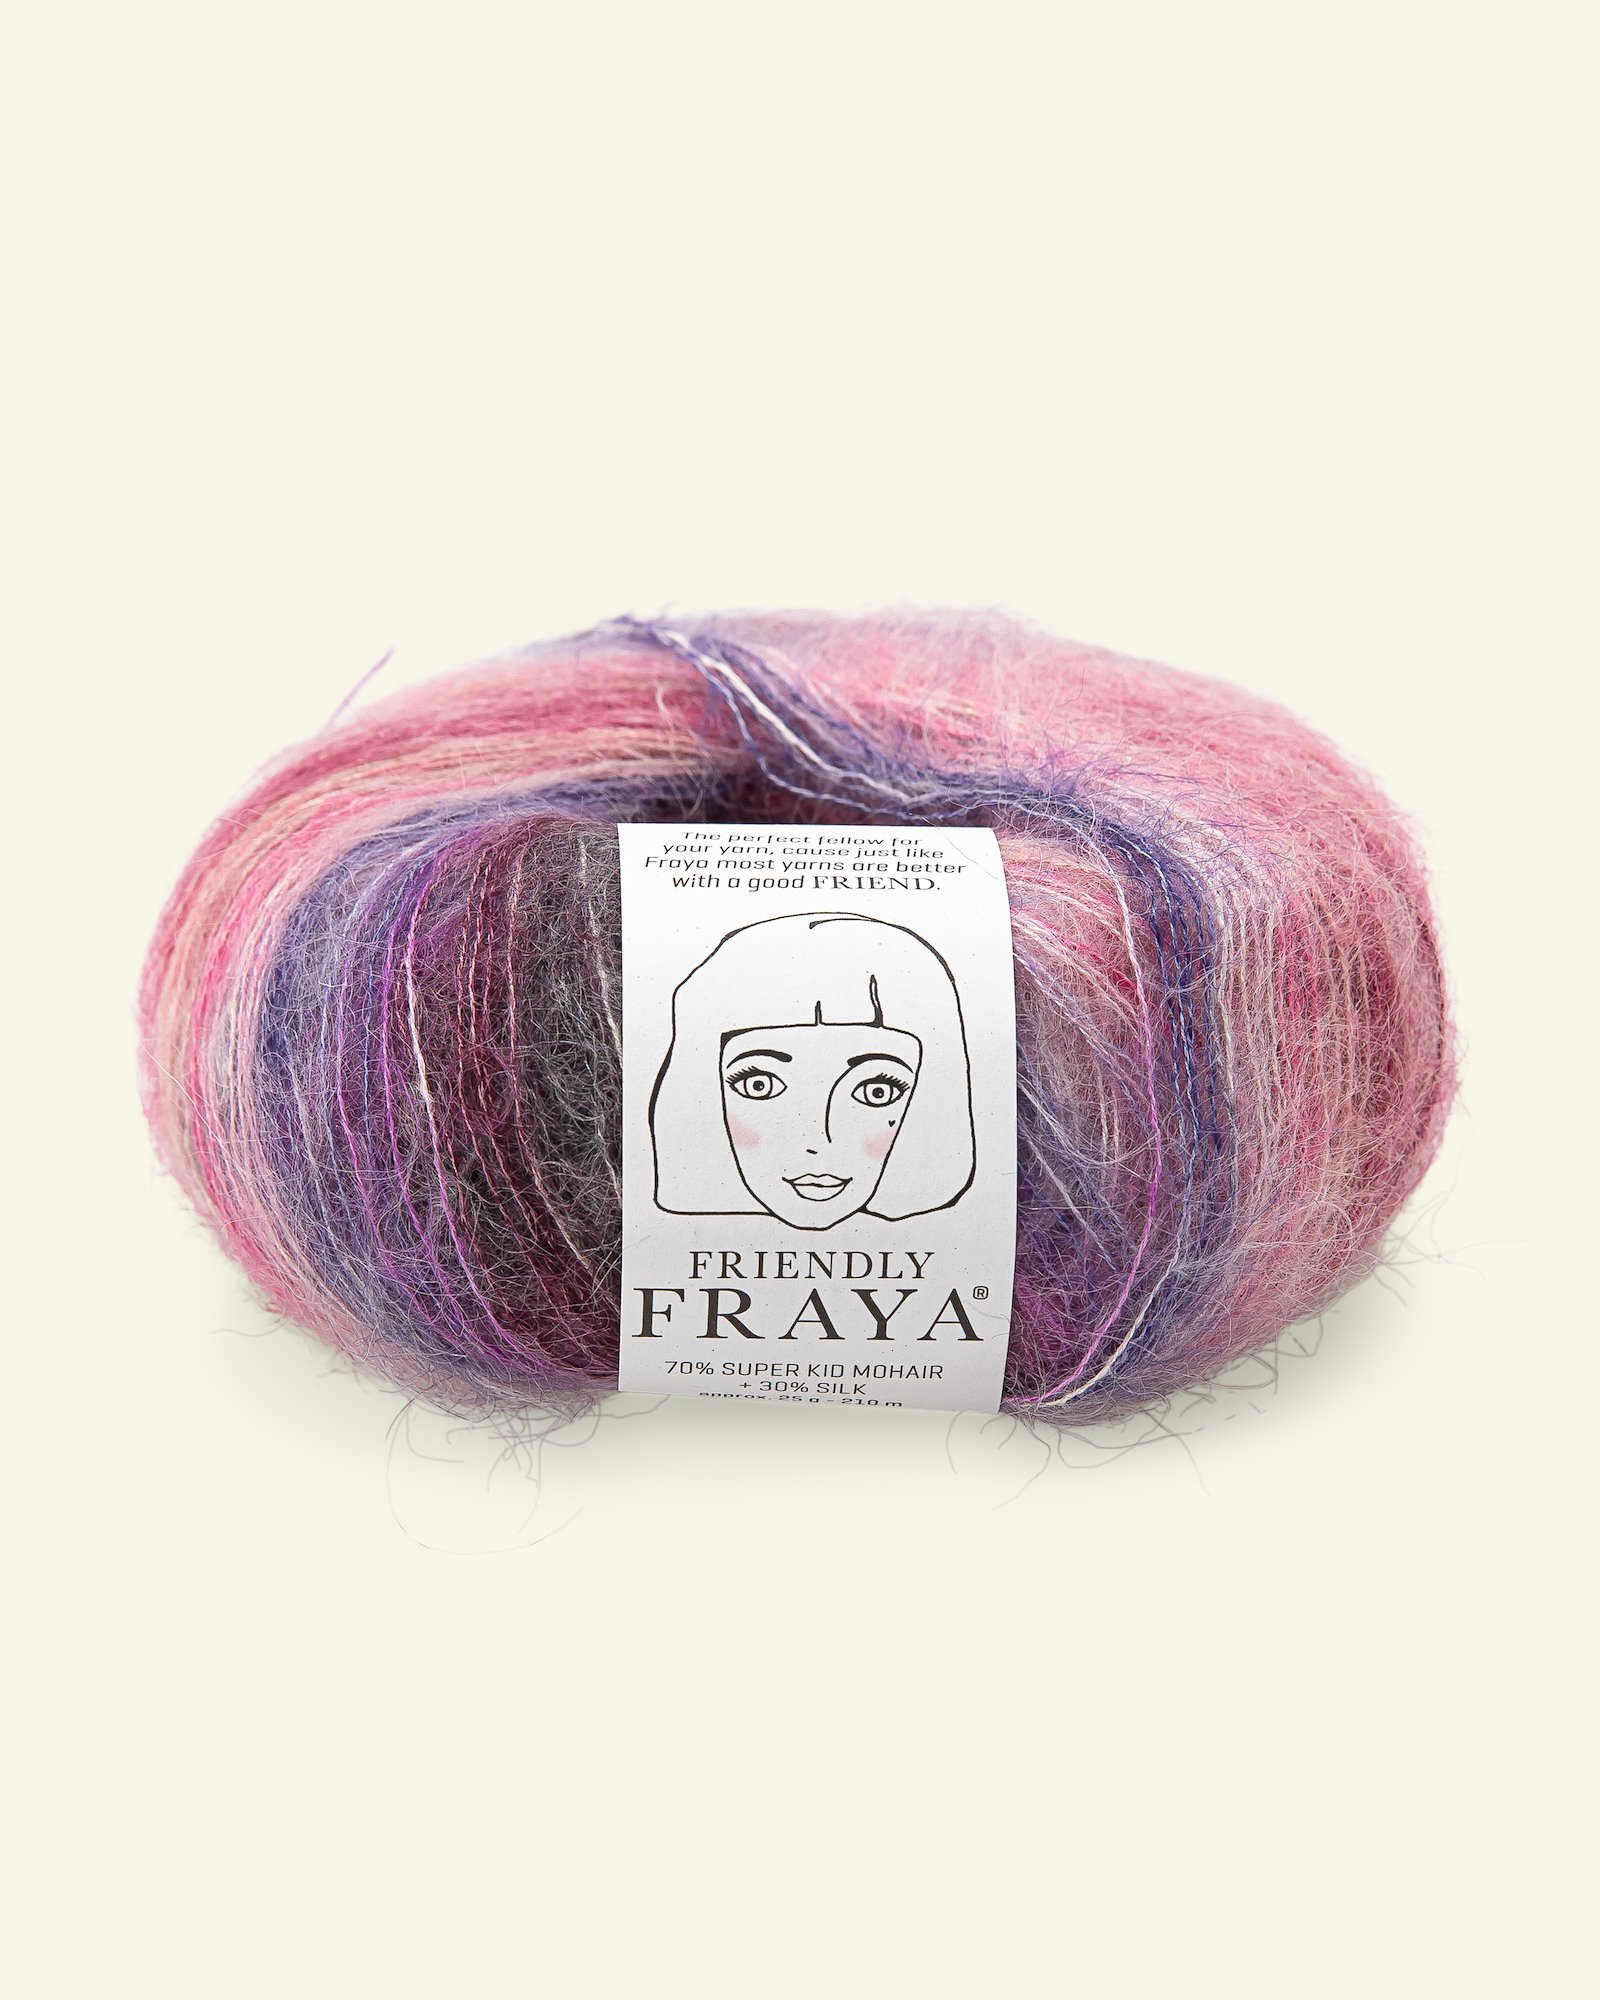 FRAYA, Wolle Seide Mohair "Friendly", Lila Mix 90000100_pack